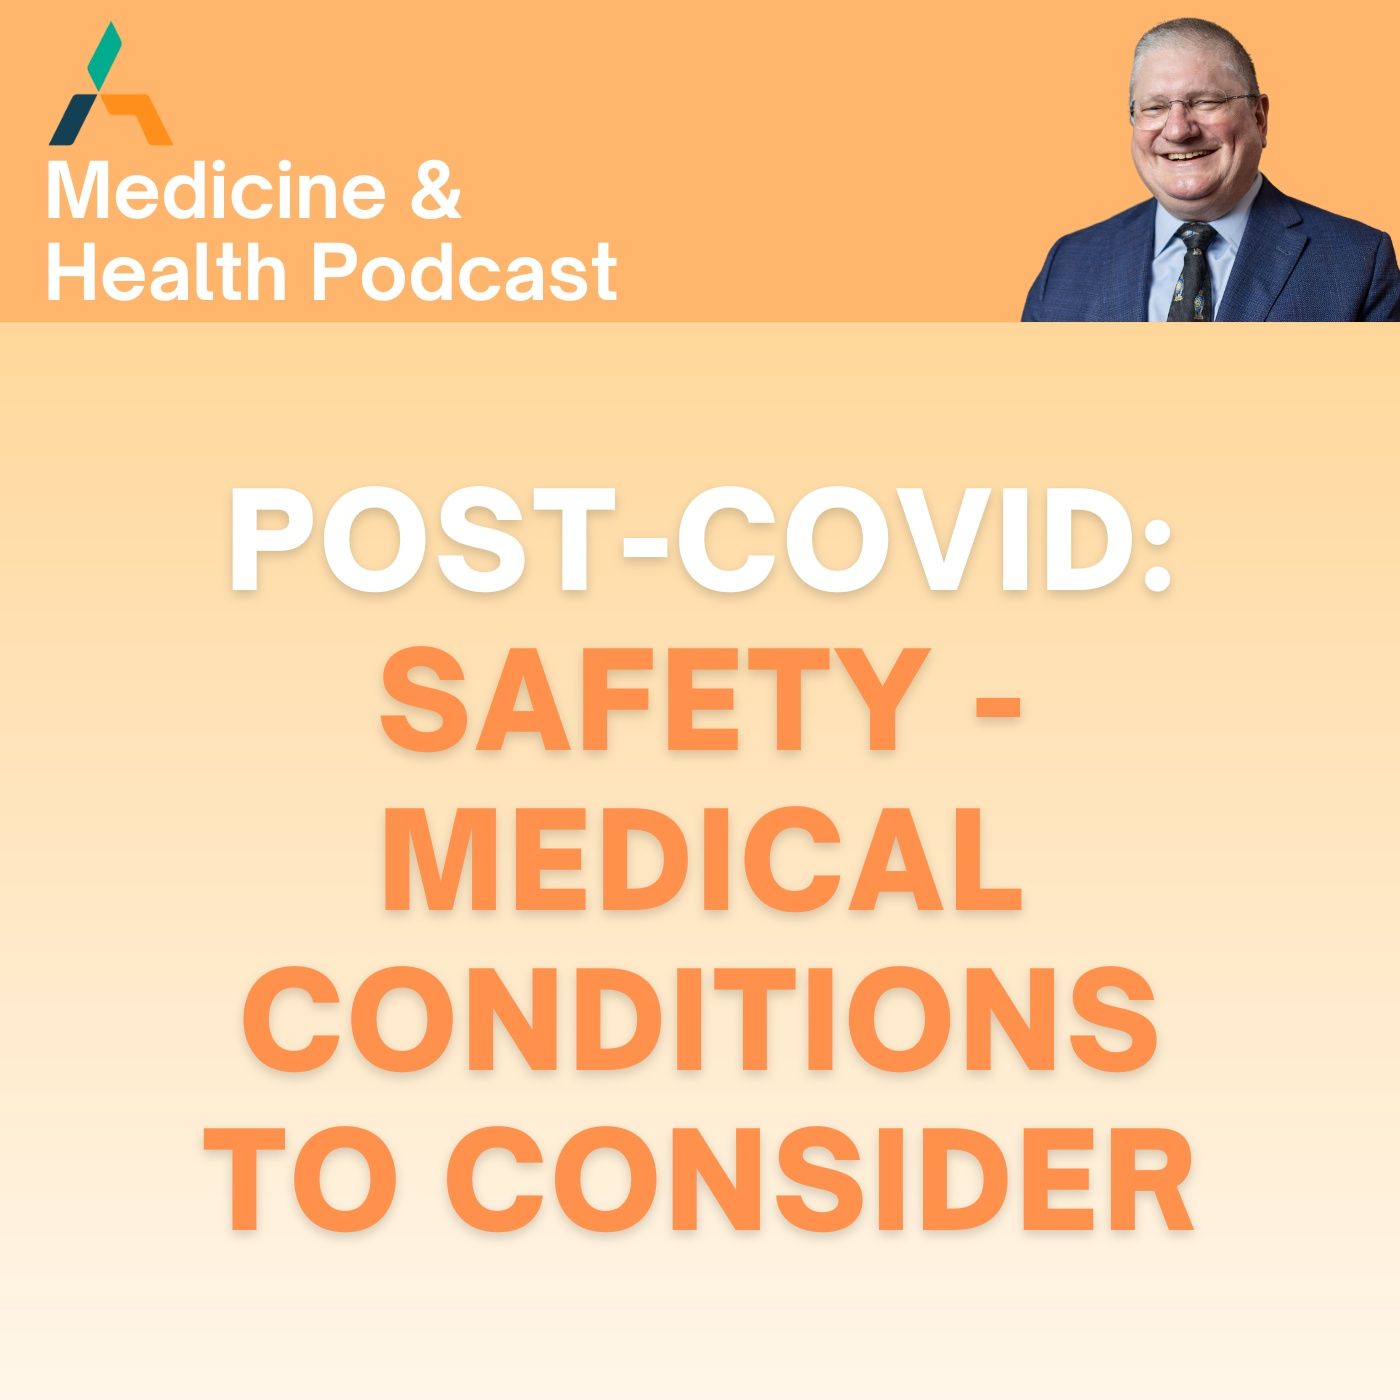 POST-COVID: SAFETY - MEDICAL CONDITIONS TO CONSIDER